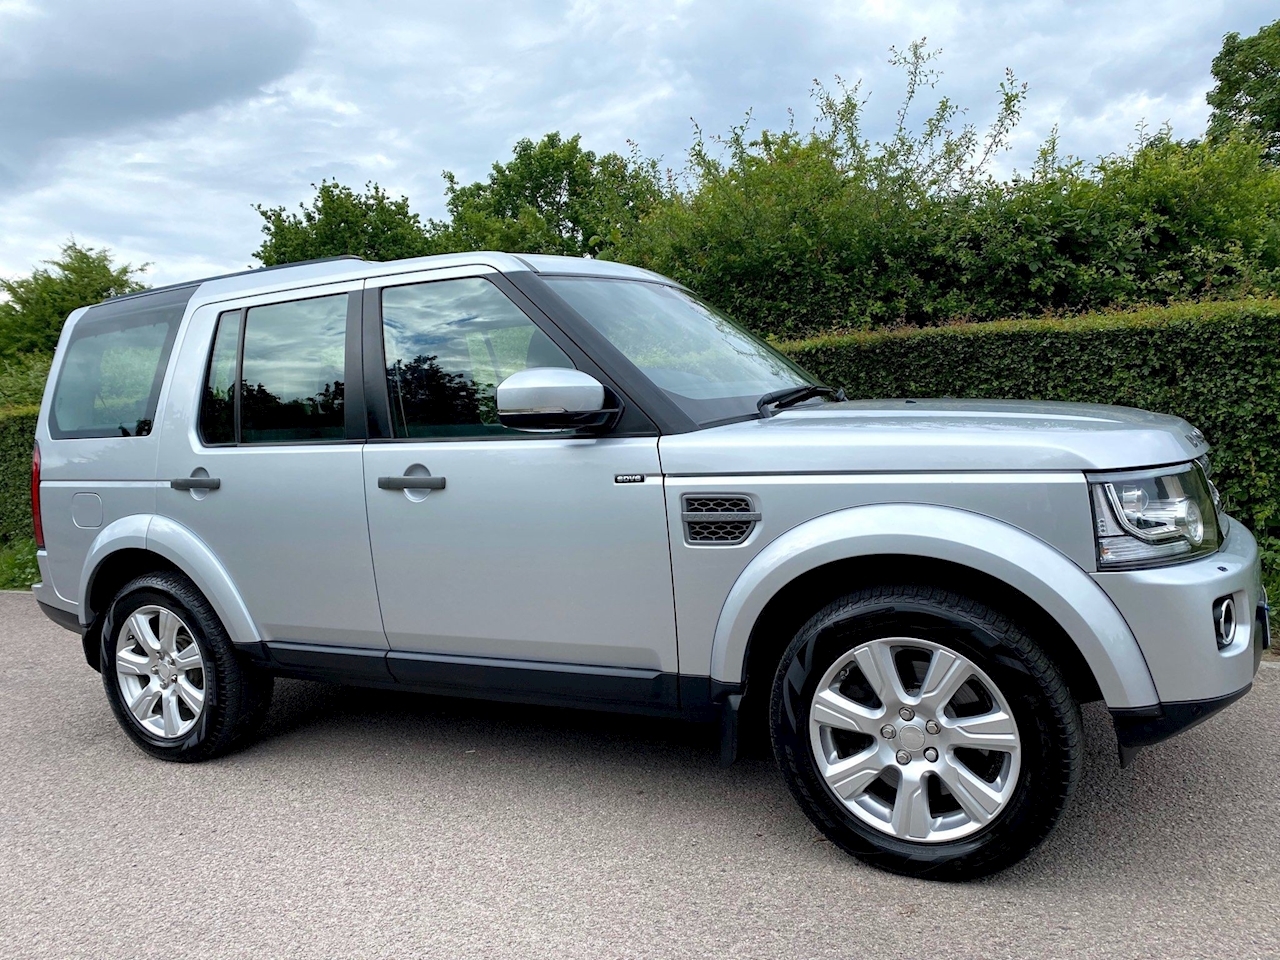 Discovery 4 3.0 SD V6 XS Auto 4WD Euro 5 (s/s) 5dr